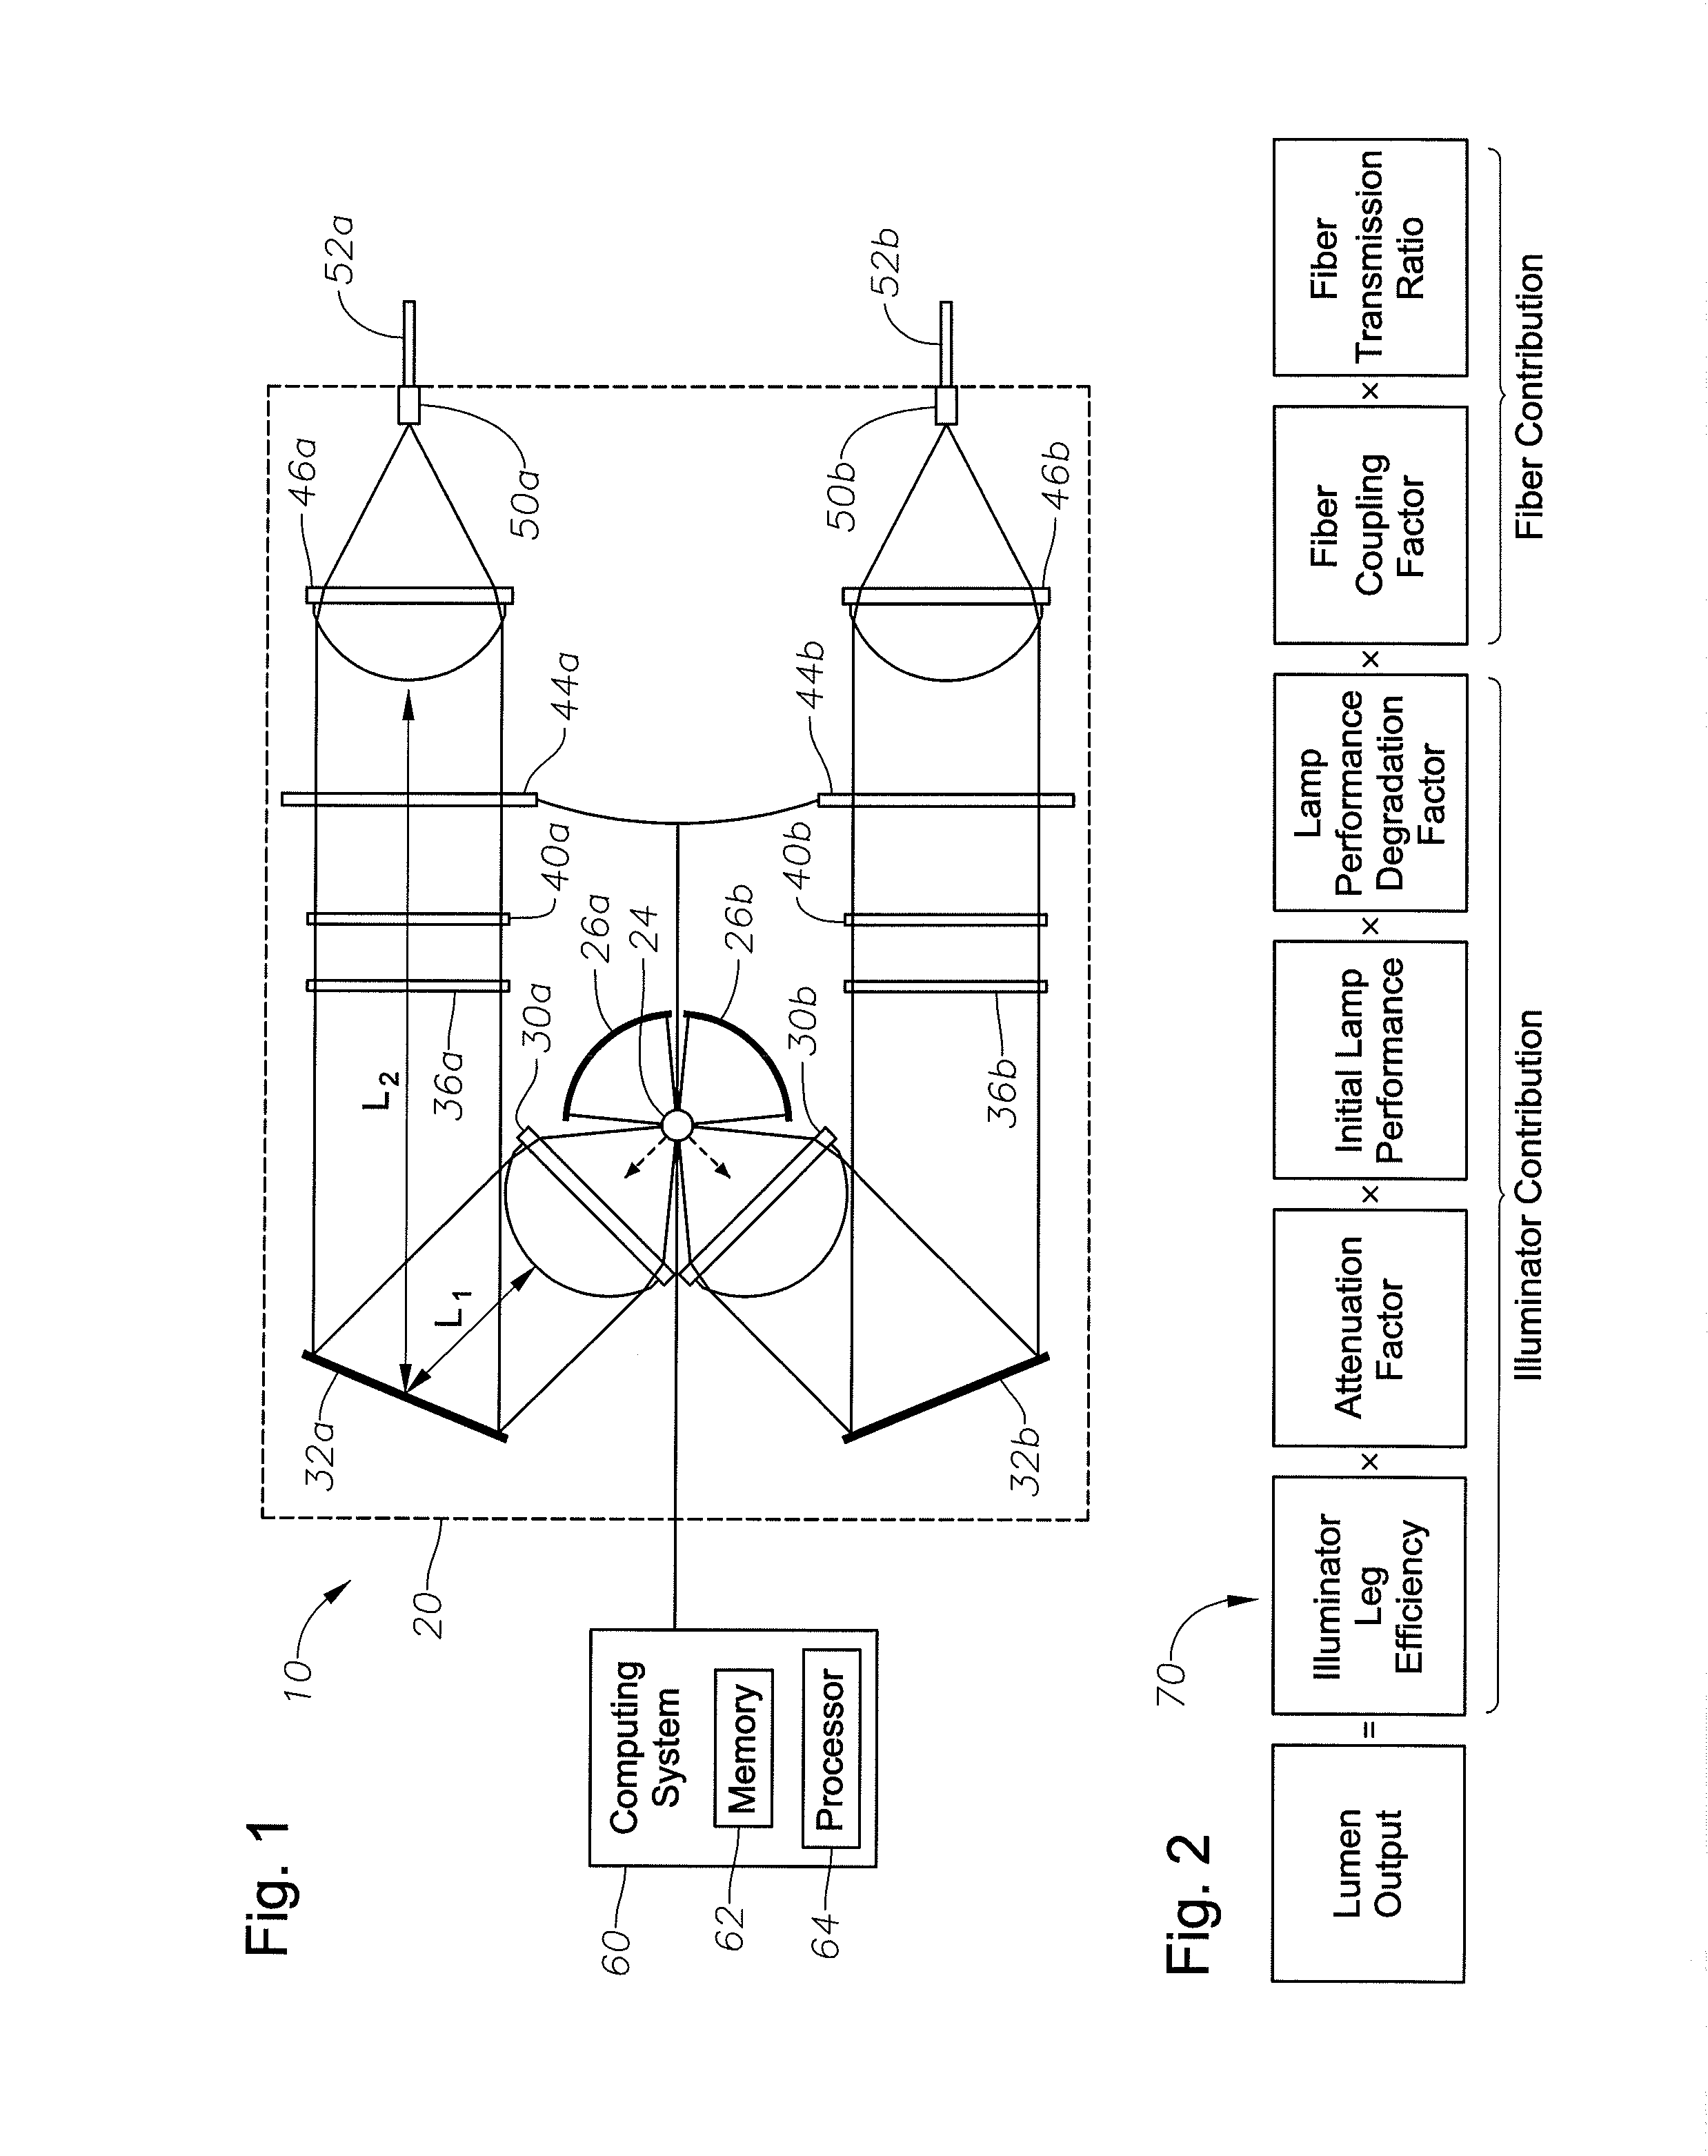 Providing consistent output from an endoilluminator system